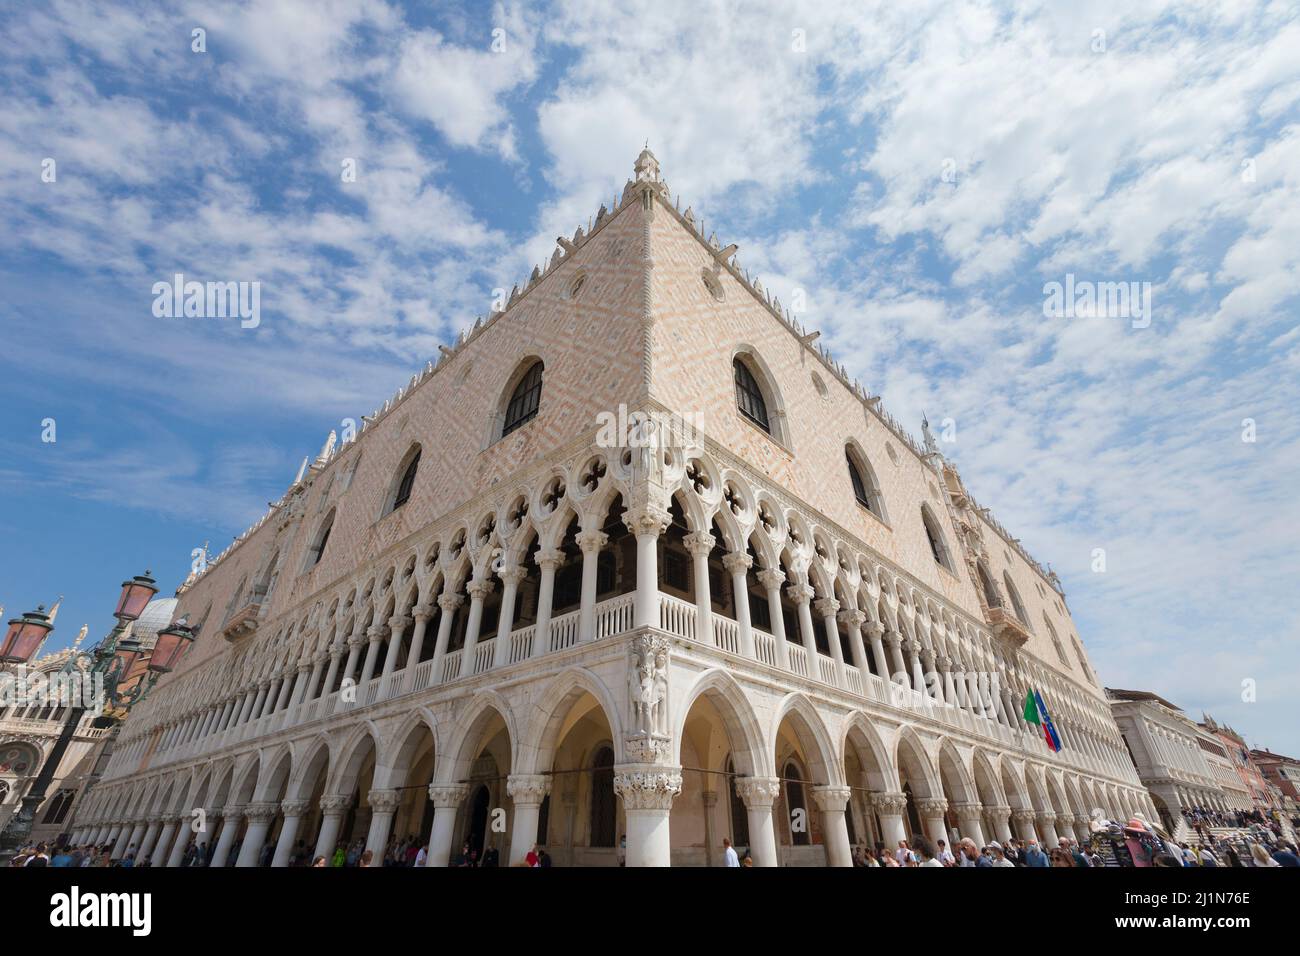 Corner of palazzo ducale or doge's palace, Venice, Italy Stock Photo